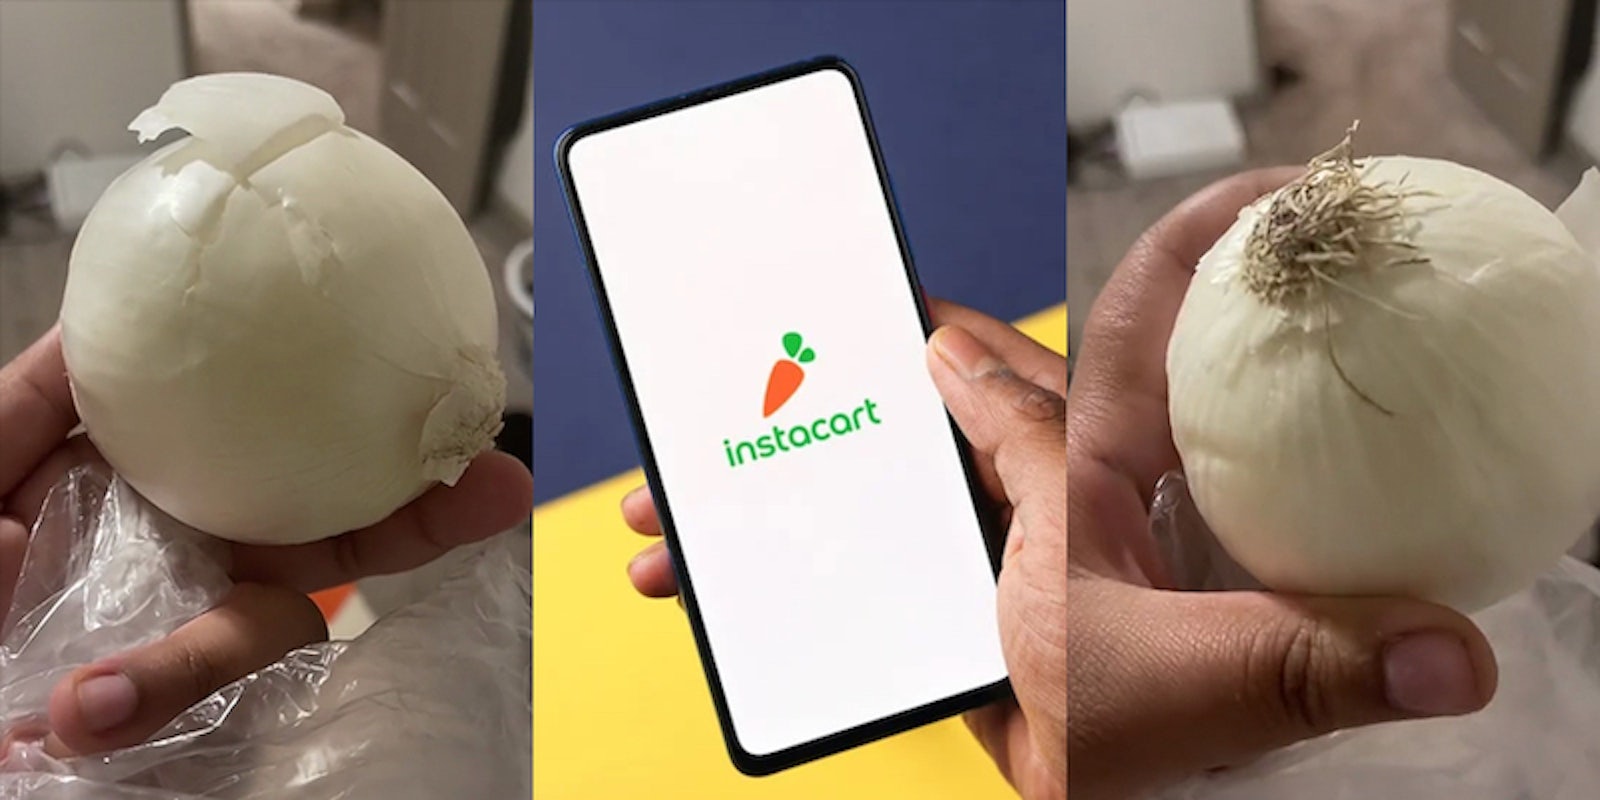 instacart customer shows onion that their shopper substituted for a green apple, phone open to instacart logo